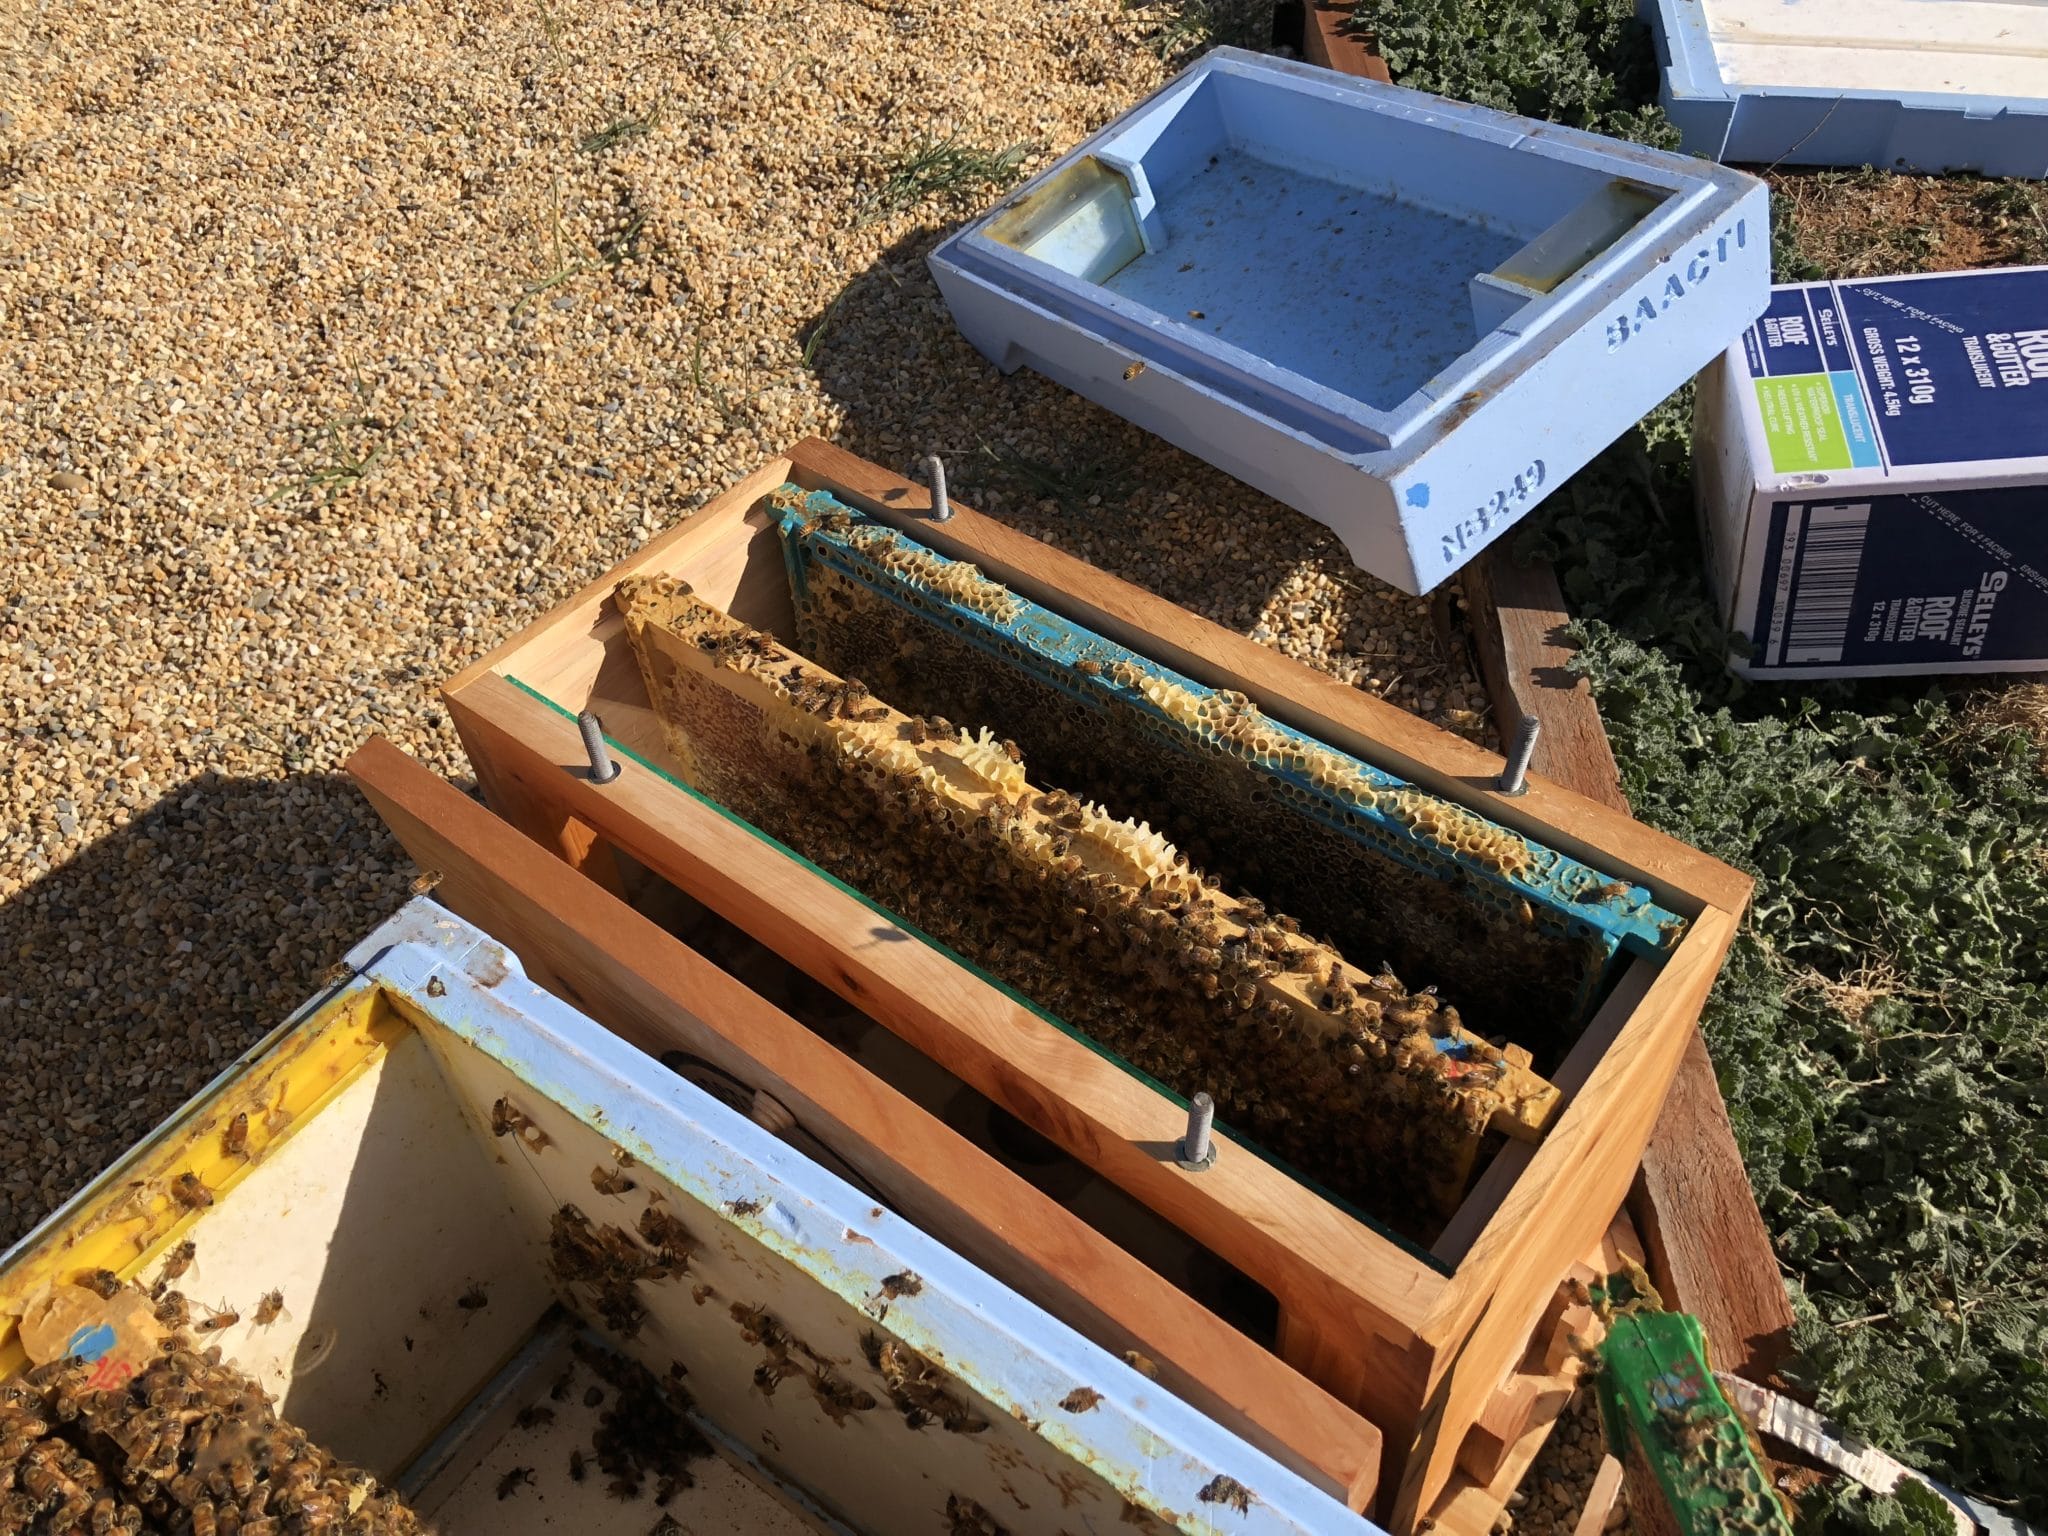 Nucs in use